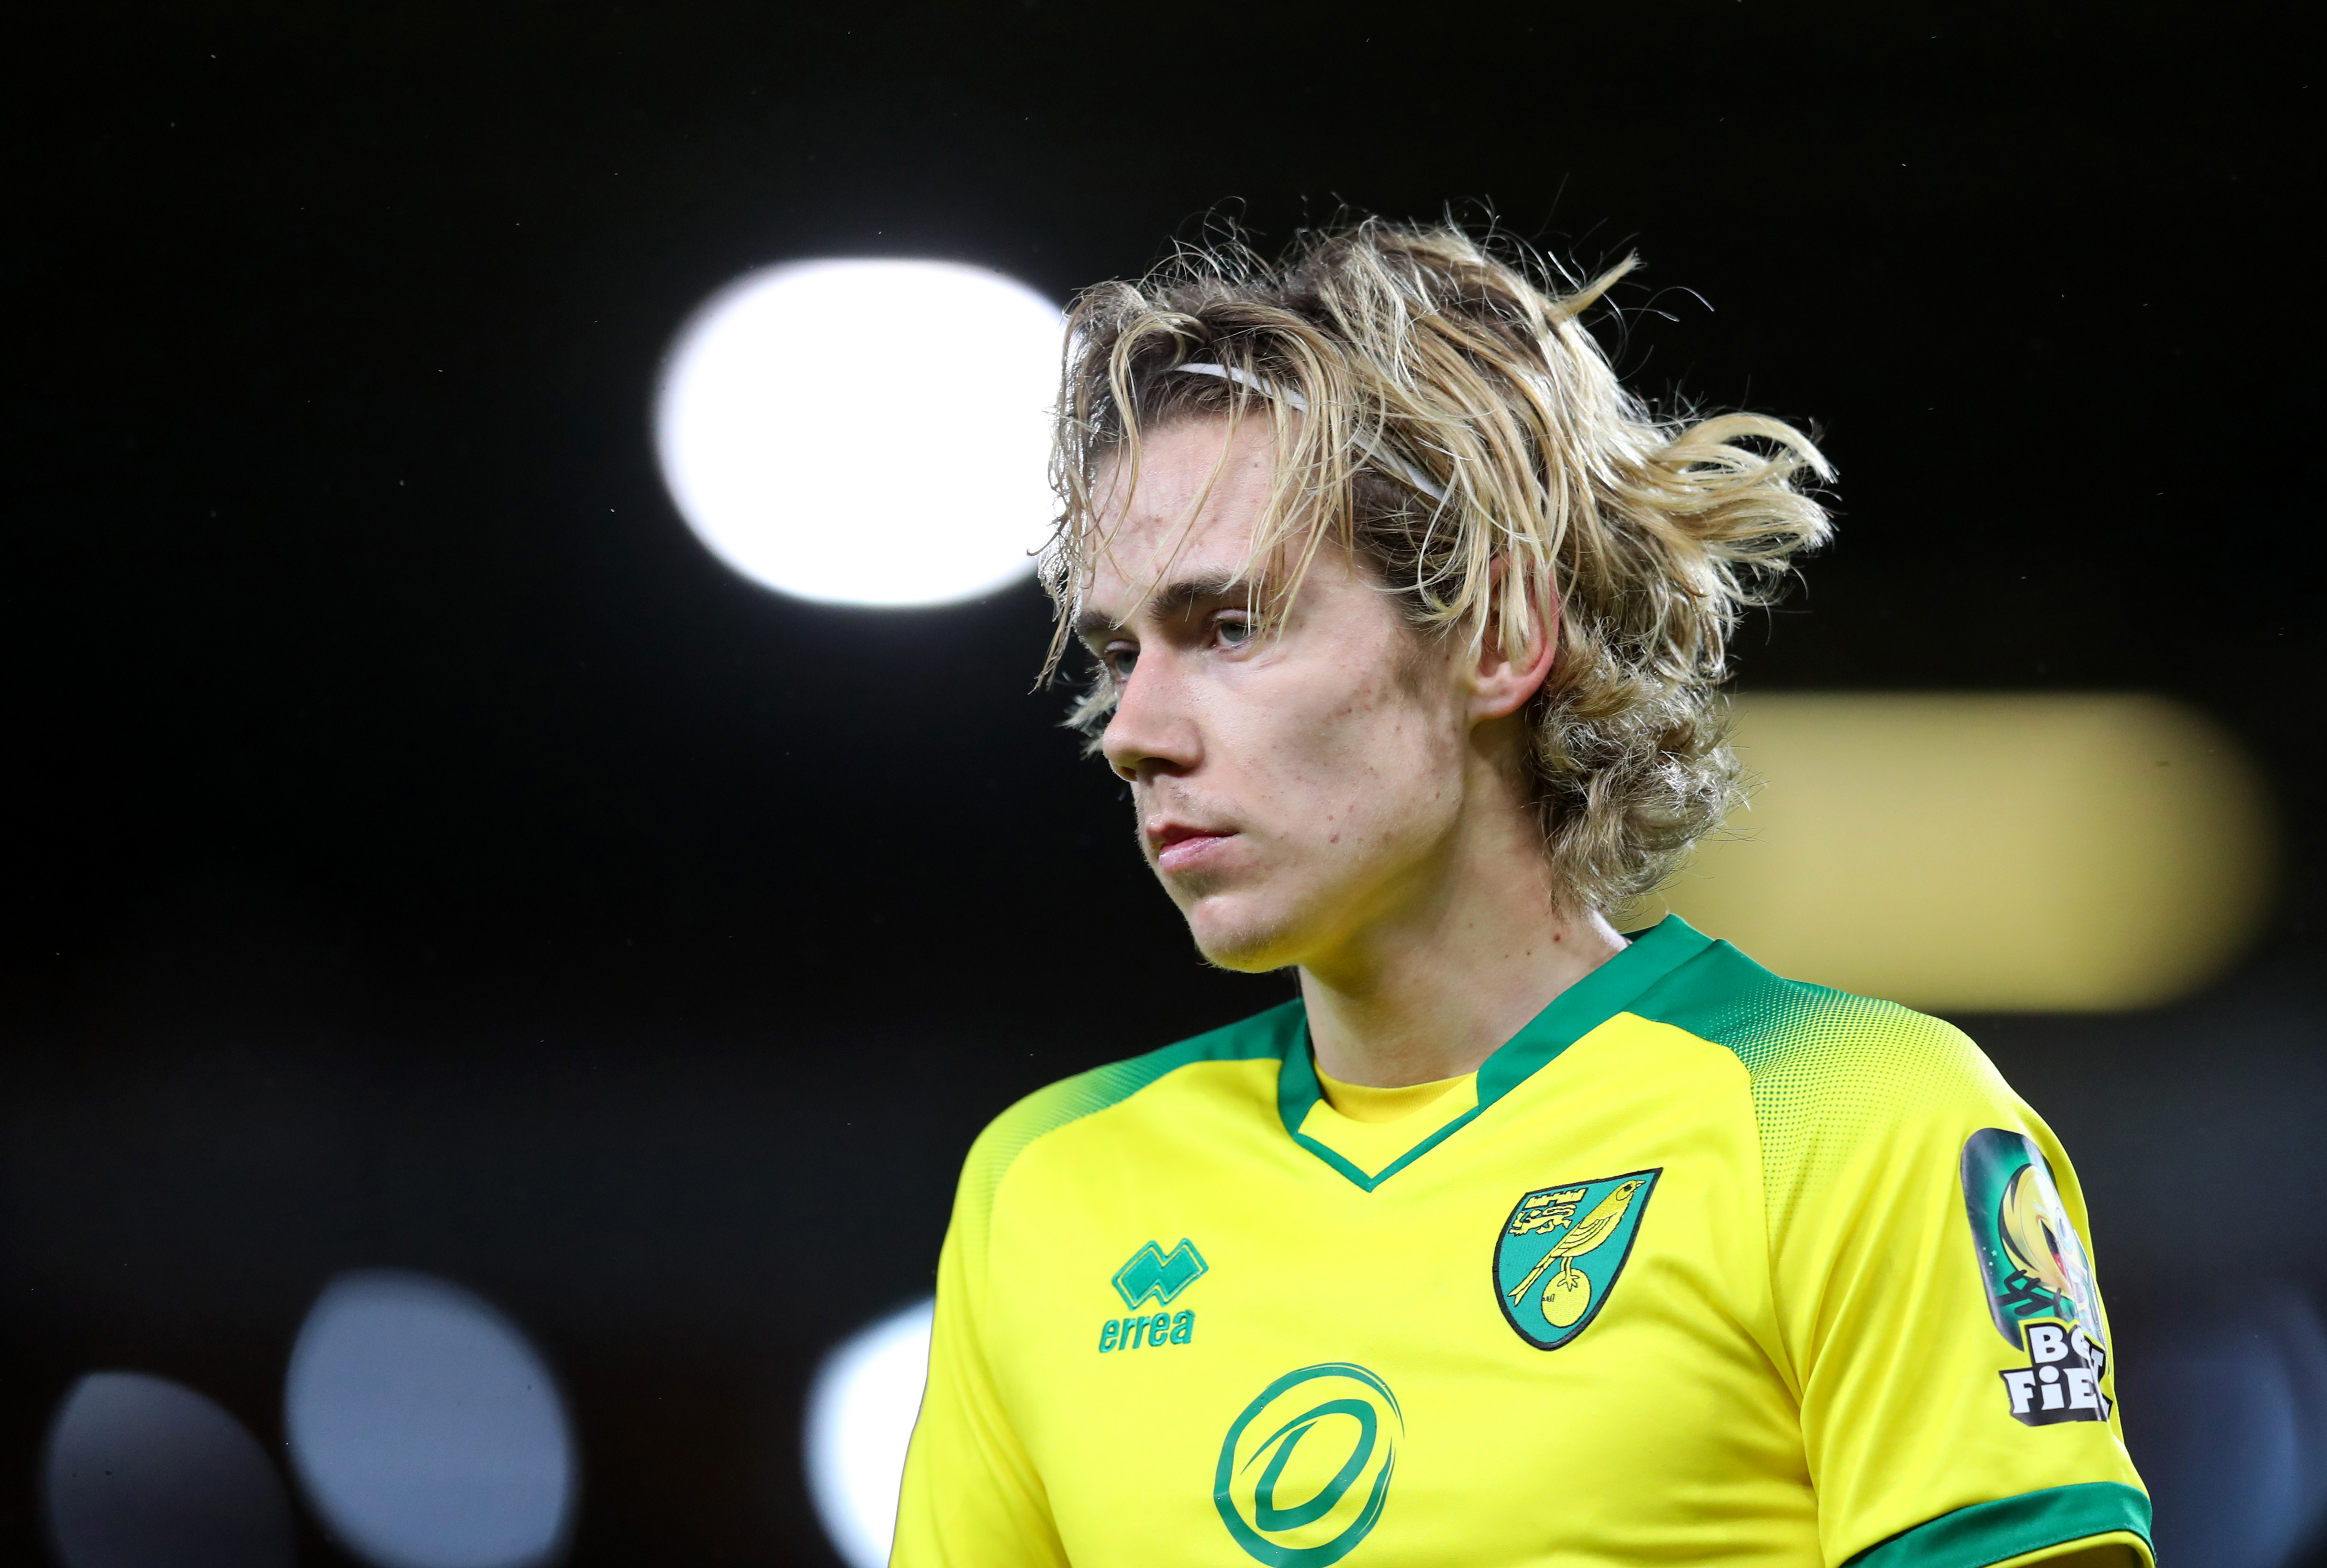 The key man for Norwich City, Cantwell is fit and ready to go. (Photo by Catherine Ivill/Getty Images)